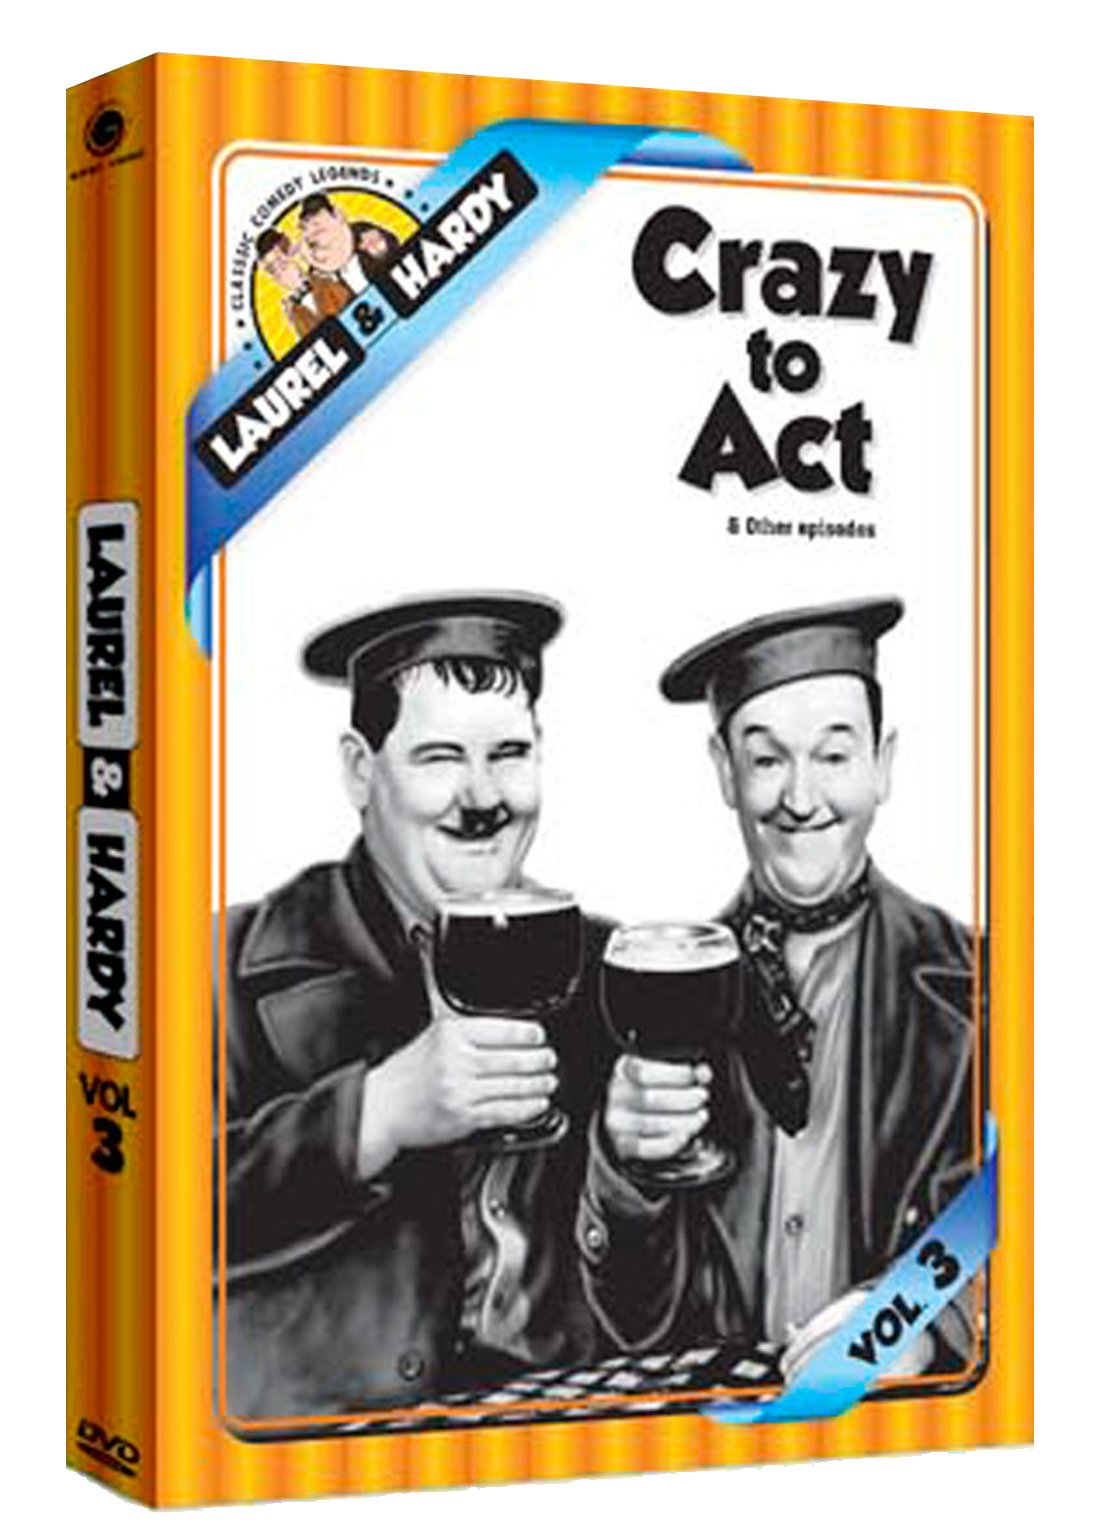 laurel-and-hardy-vol-3-crazy-to-act-movie-purchase-or-watch-online